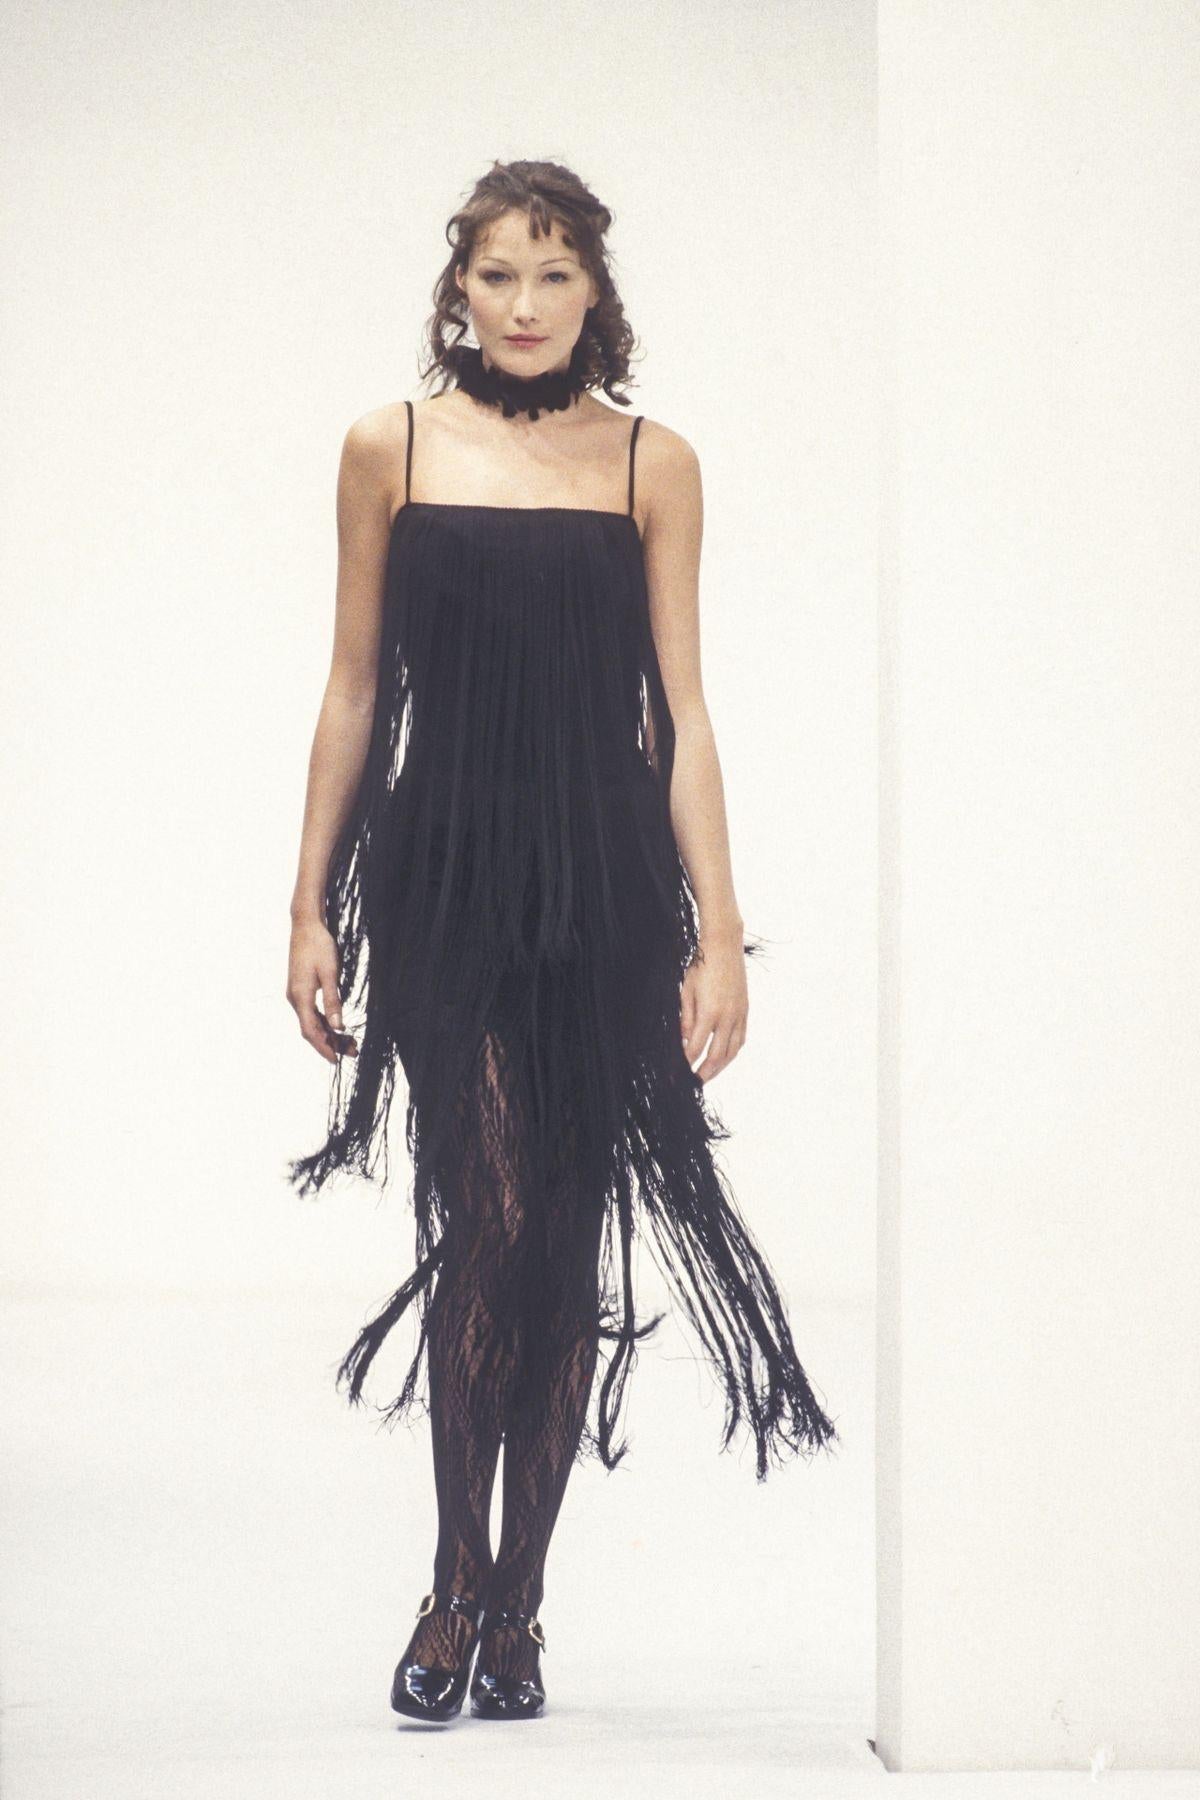 Presenting a chic navy fringe flapper-style Dolce & Gabbana dress. From the Fall/Winter 1993 collection, this mini dress debuted on the season's runway on Carla Bruni, with a similar dress highlighted in the season's ad campaign, captured by Steven